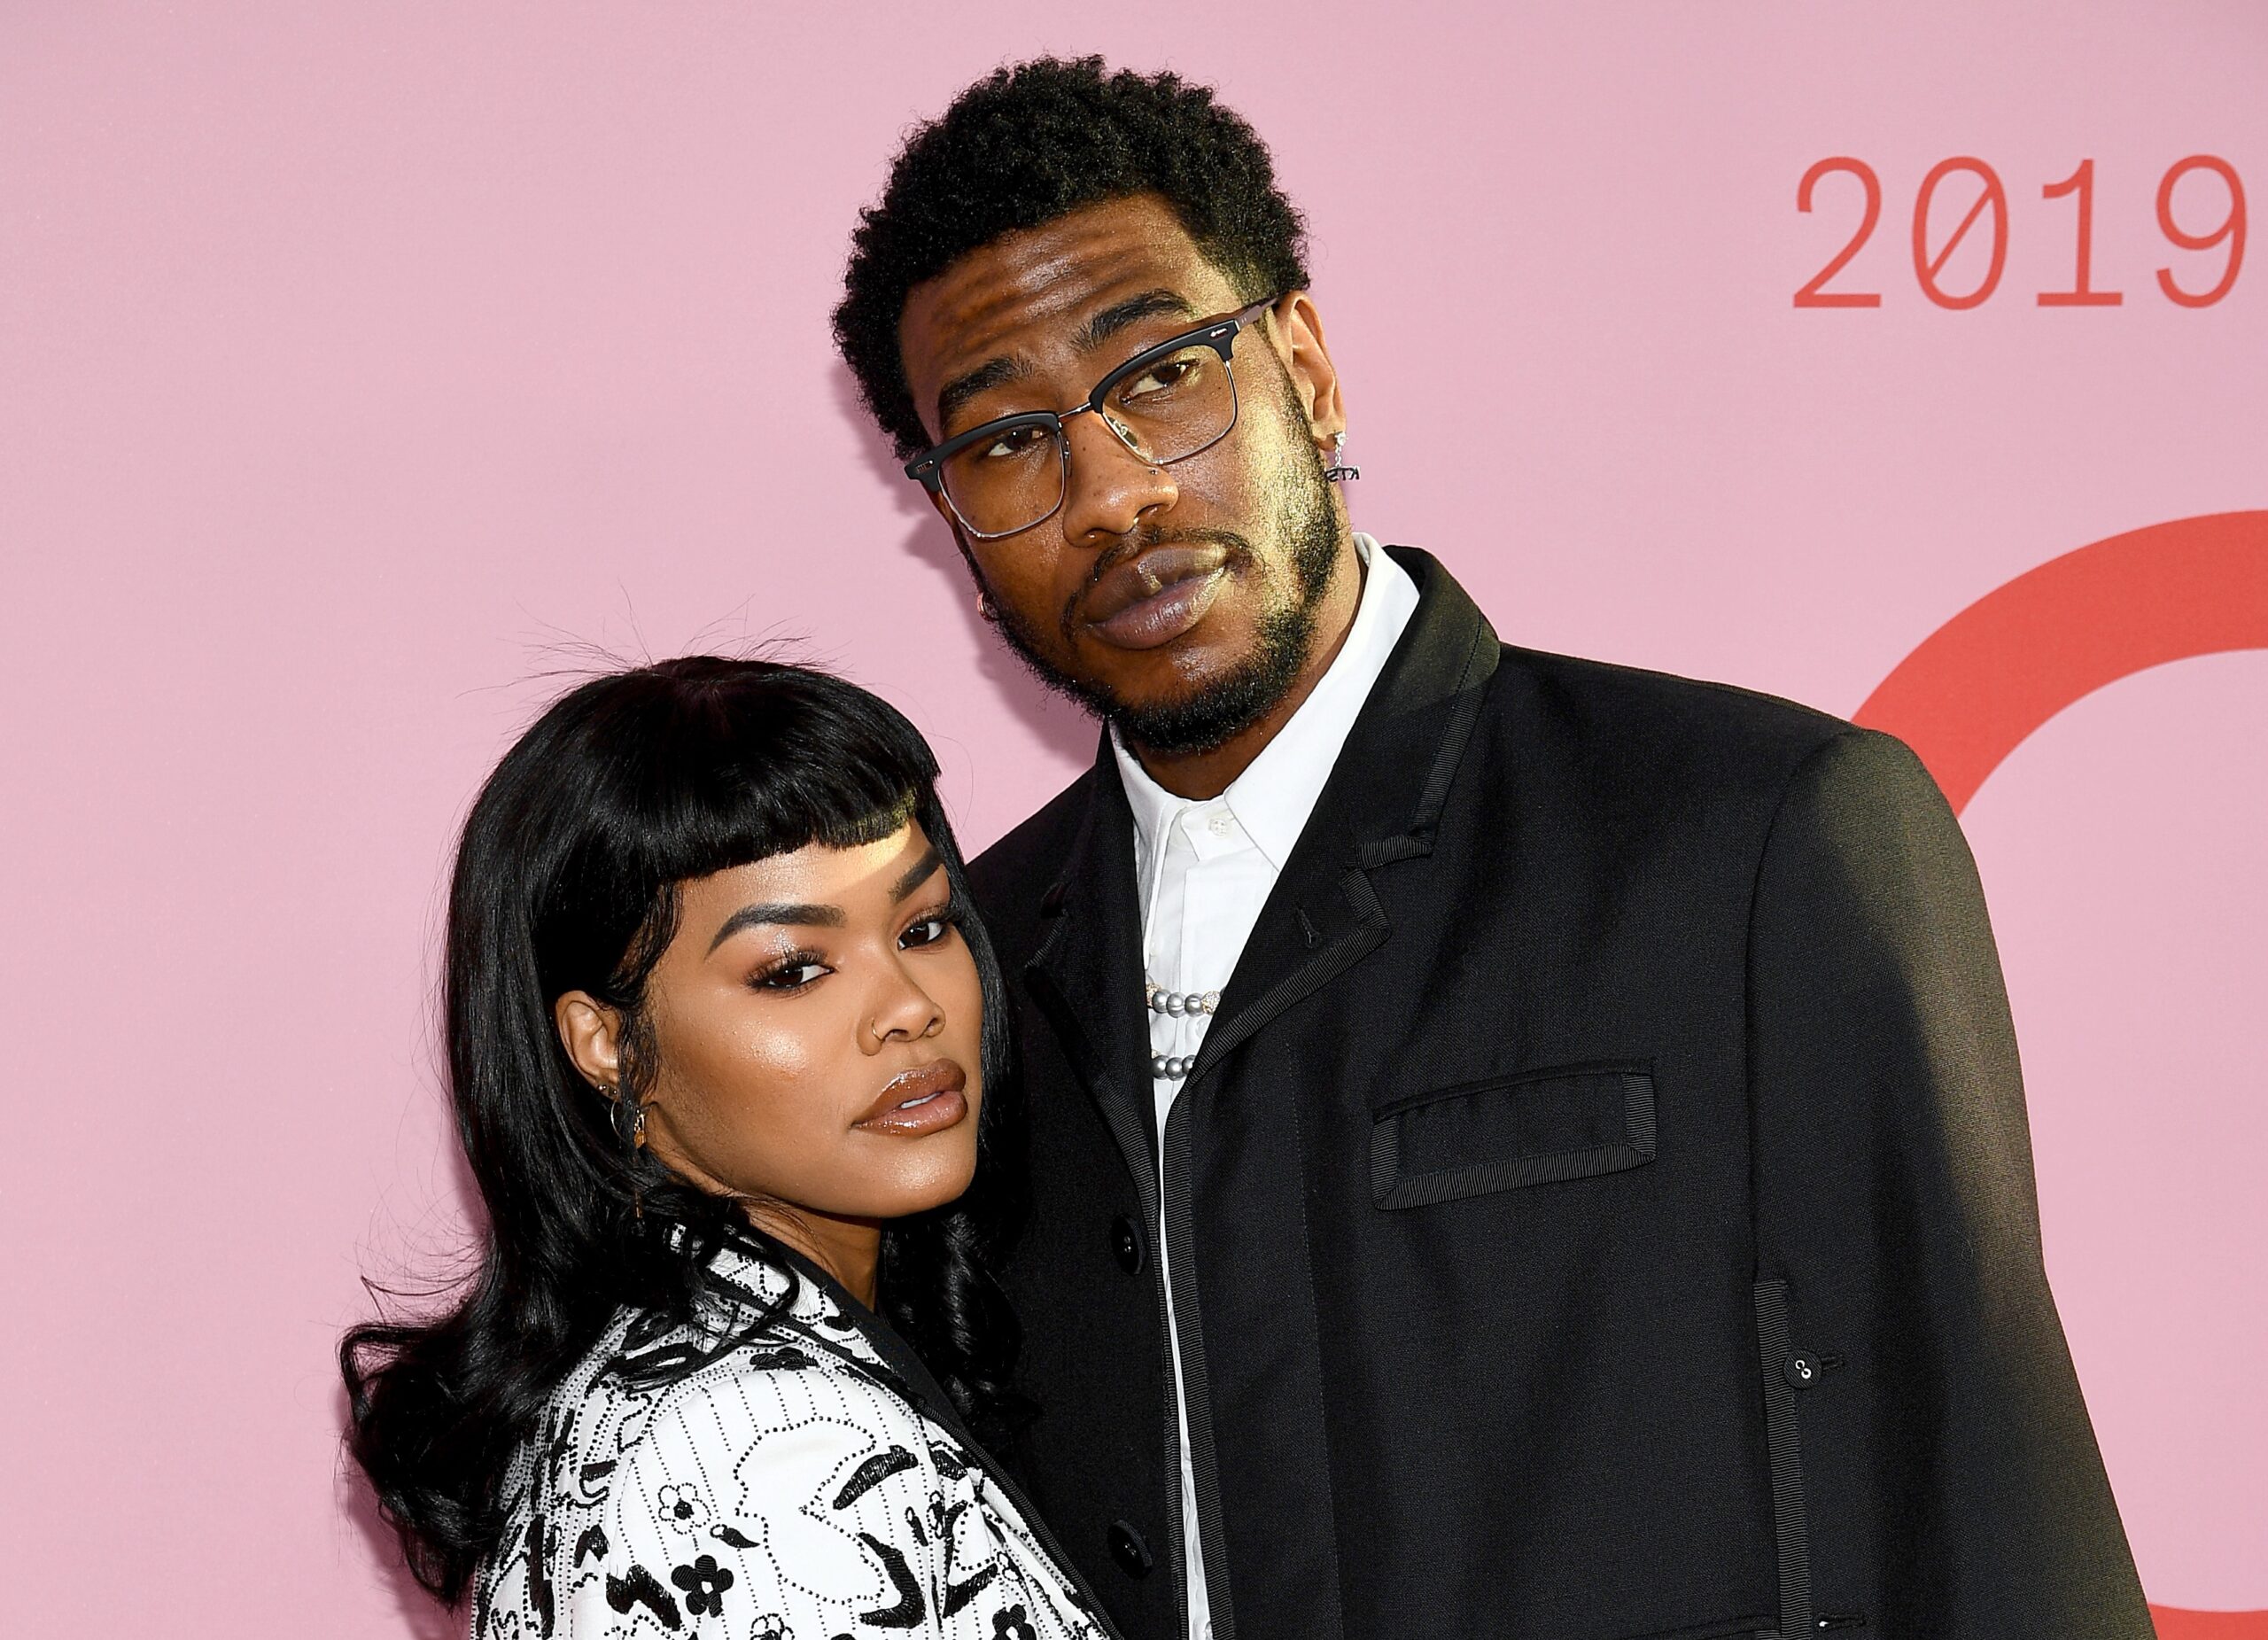 Iman Shumpert Claims Teyana Taylor Makes Double His Income Amid Child Support Battle